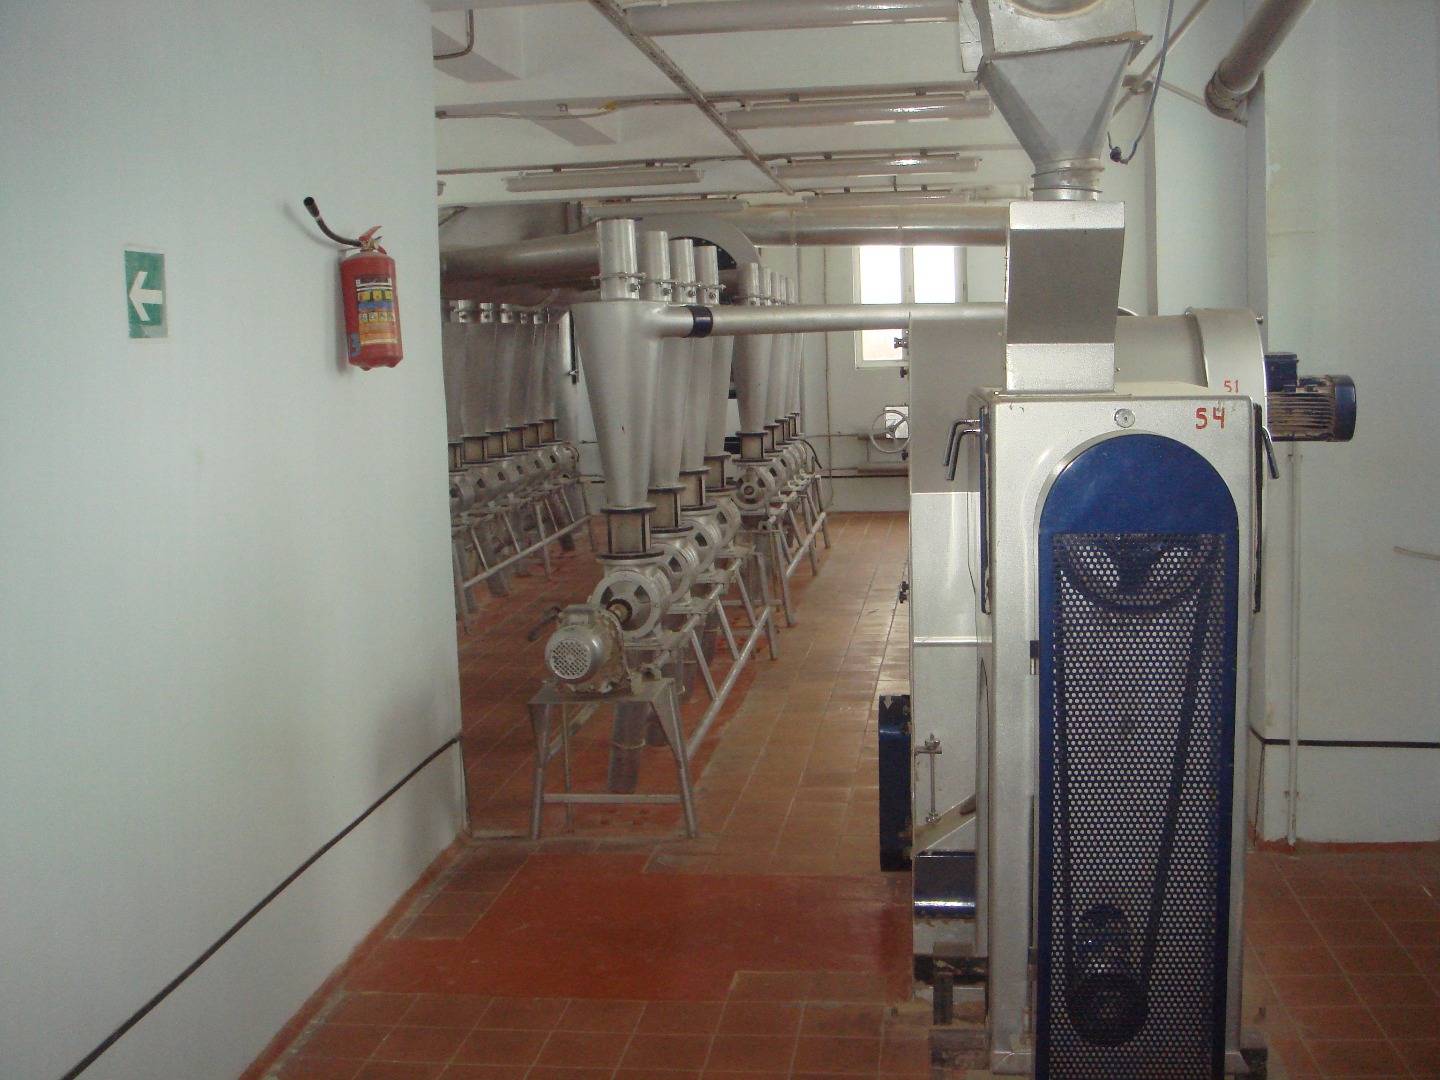 FLOUR-GRINDING AND COMPOUND FEED COMPLEX